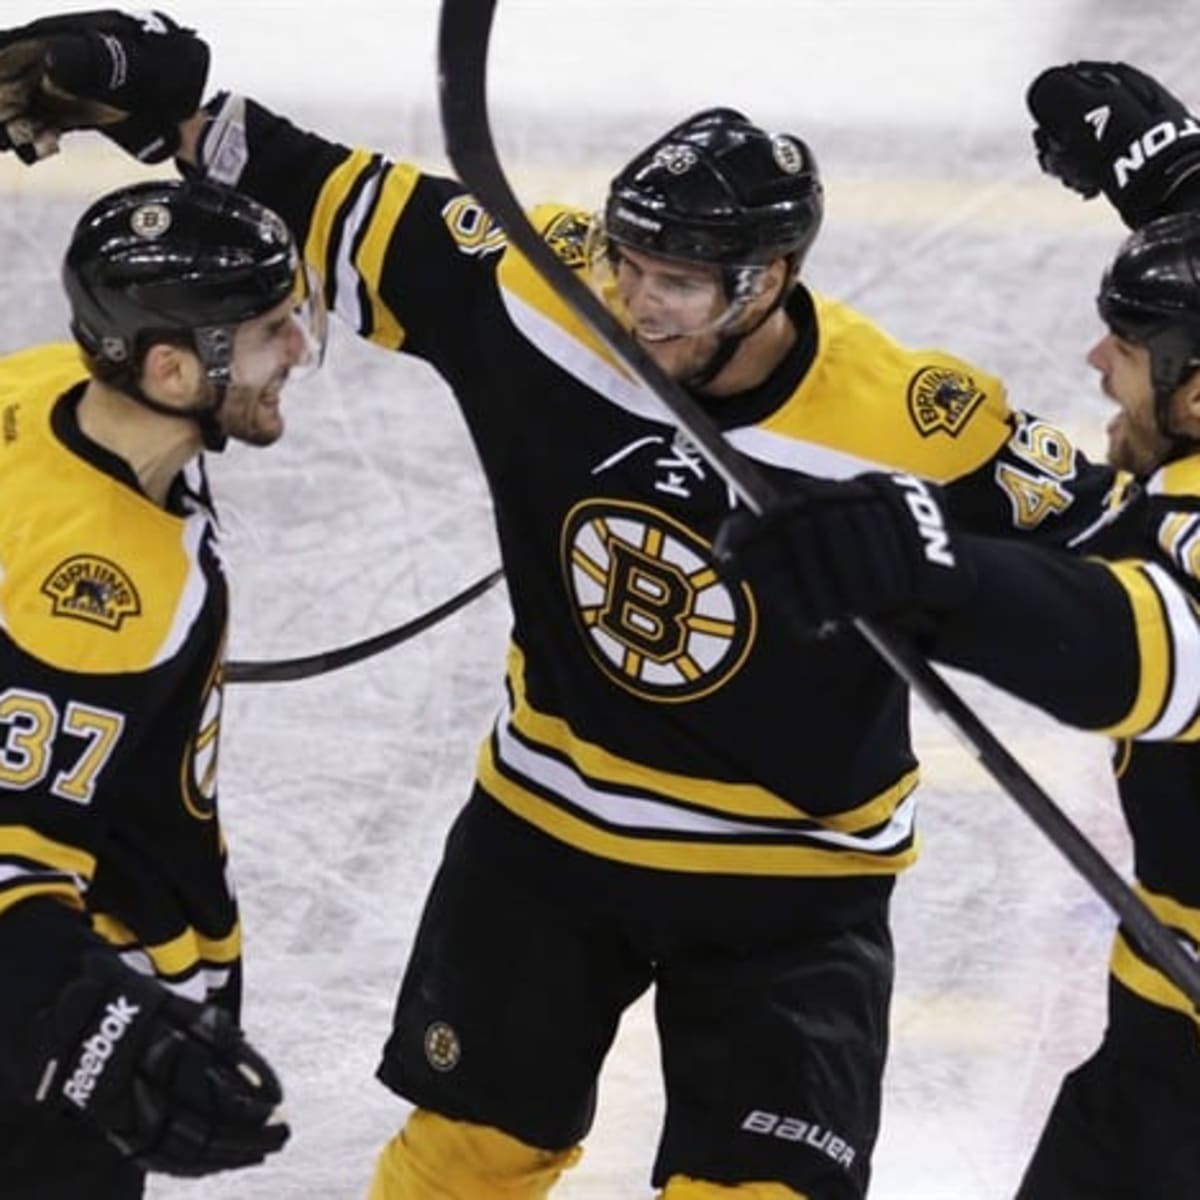 Media Roundup: NBC, NESN, CSNNE Gear Up For Bruins' Playoff Push